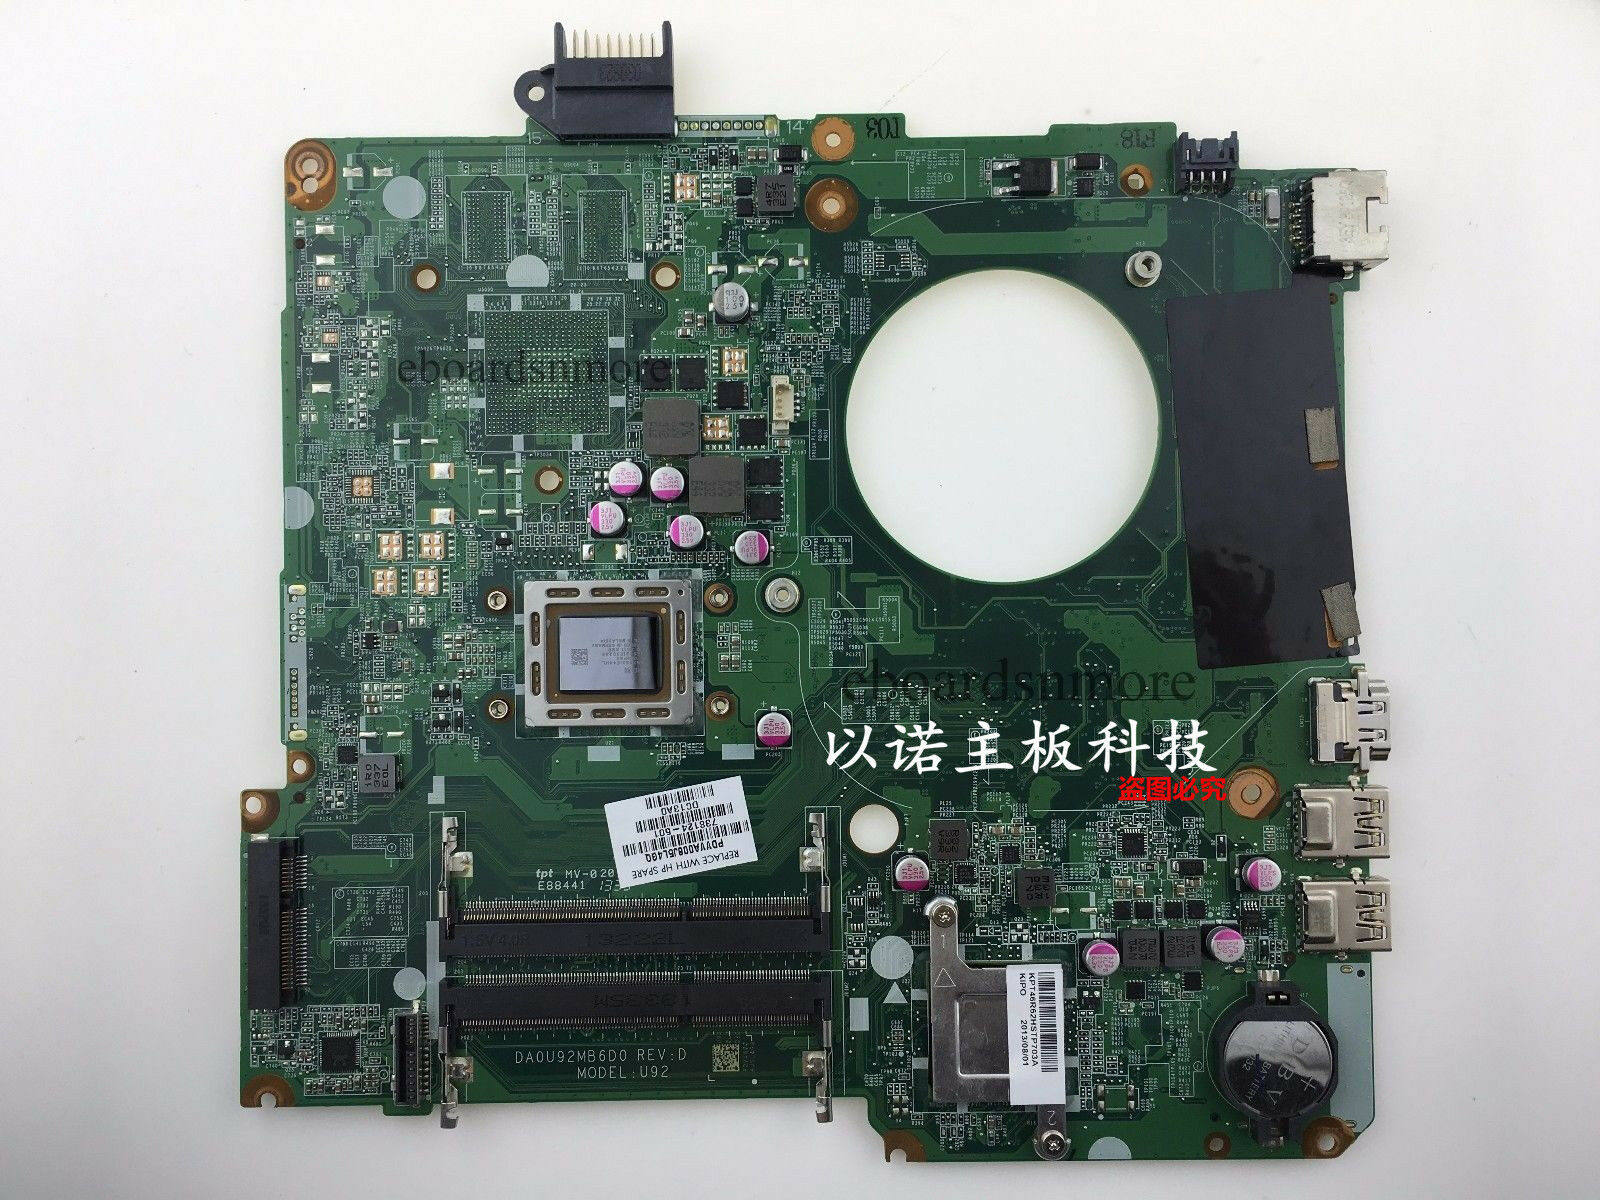 738124-501 Motherboard For HP Pavilion 15-N Laptop DA0U92MB6D0 A10-5745M, A Cond Memory Type: DDR3 SDRAM So